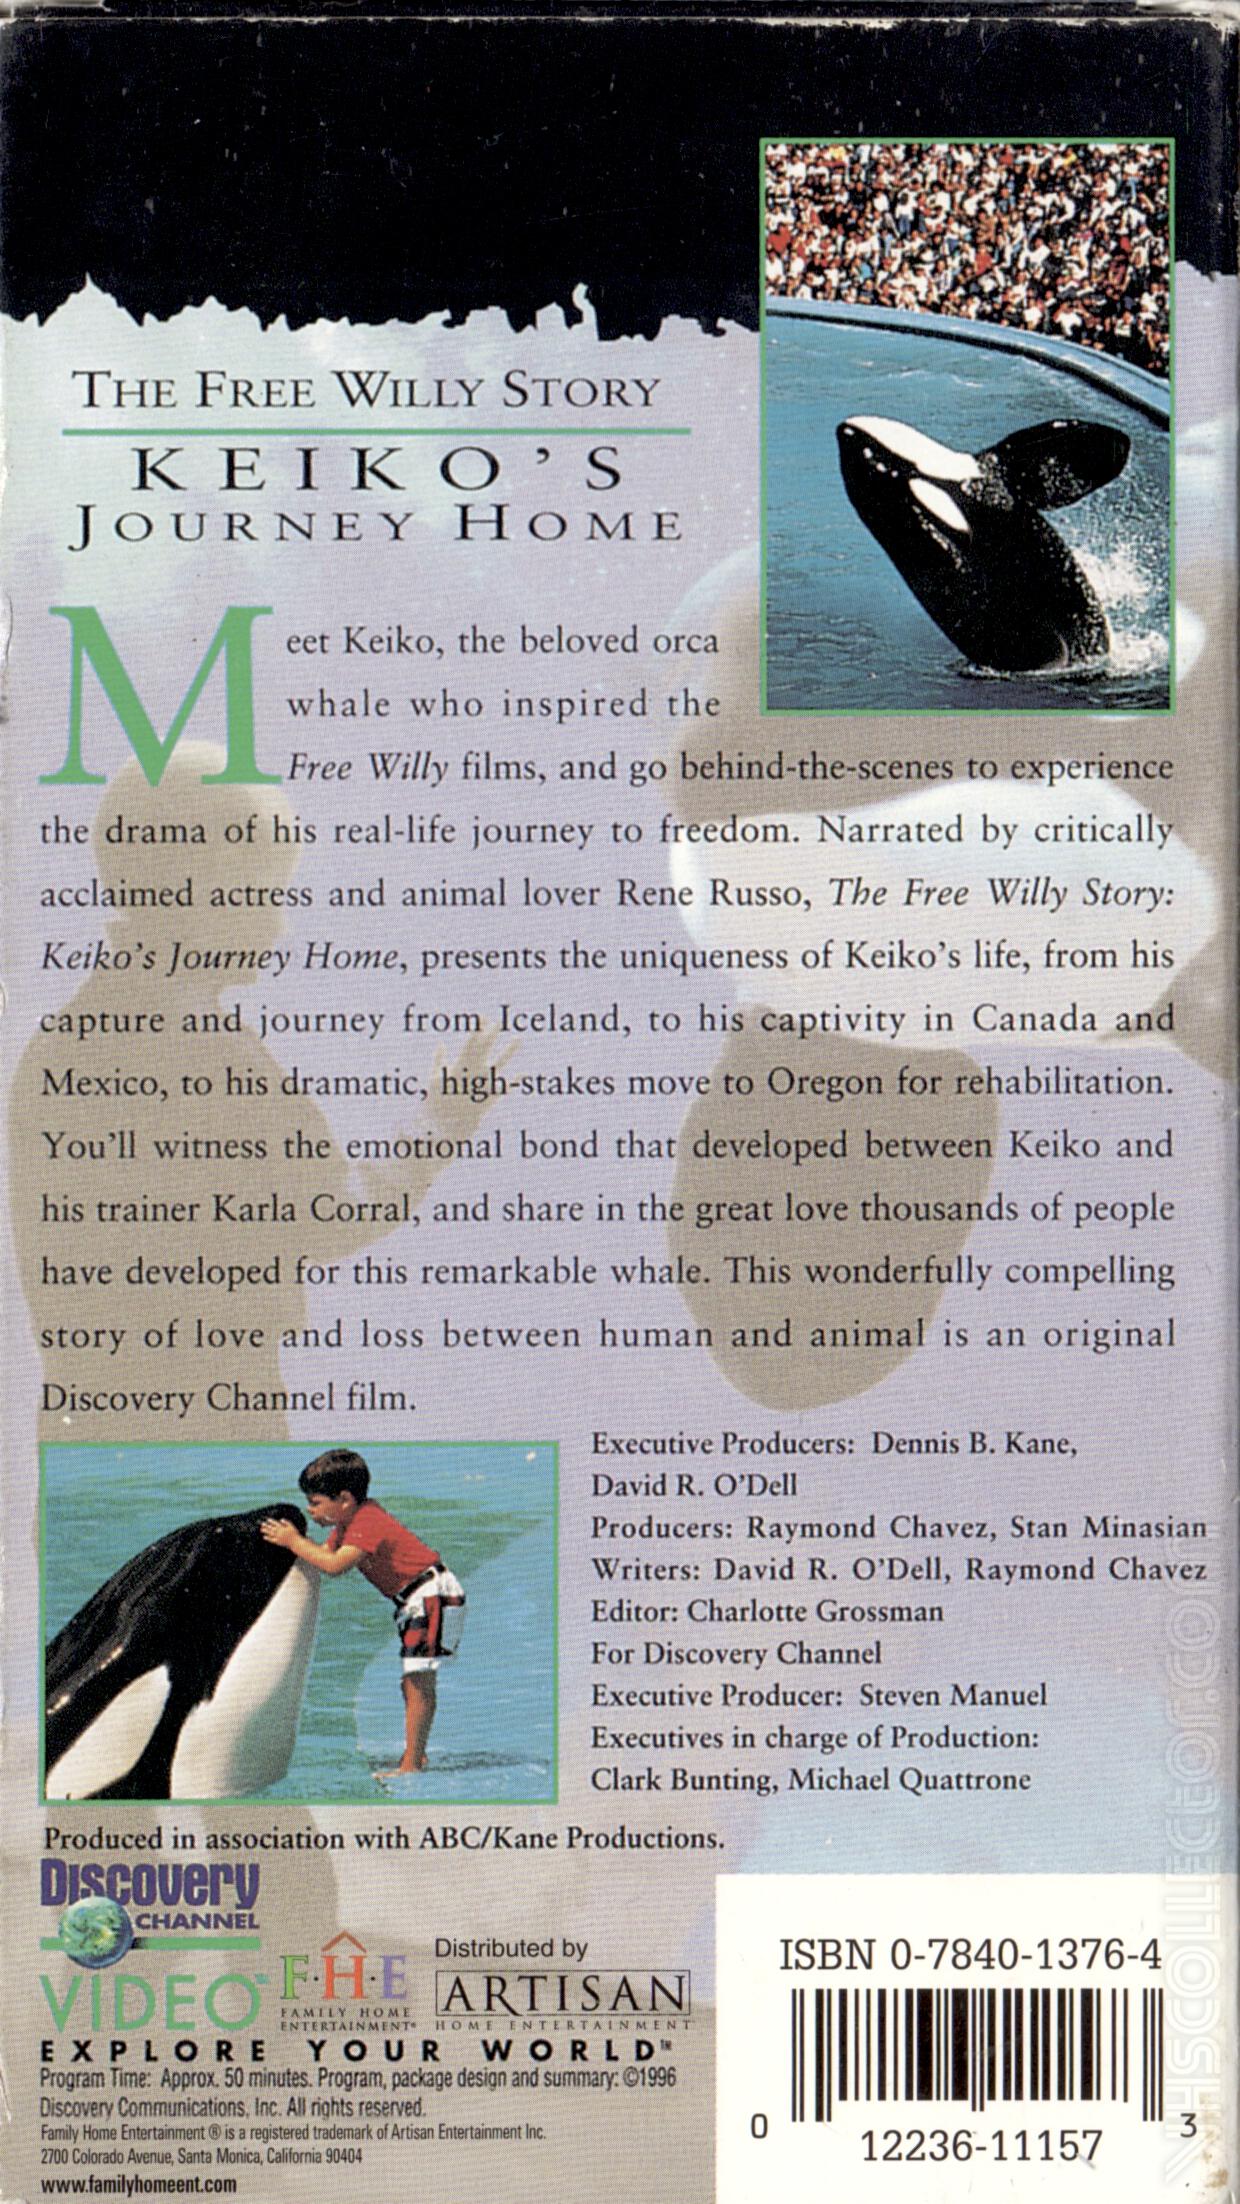 free willy story keiko's journey home